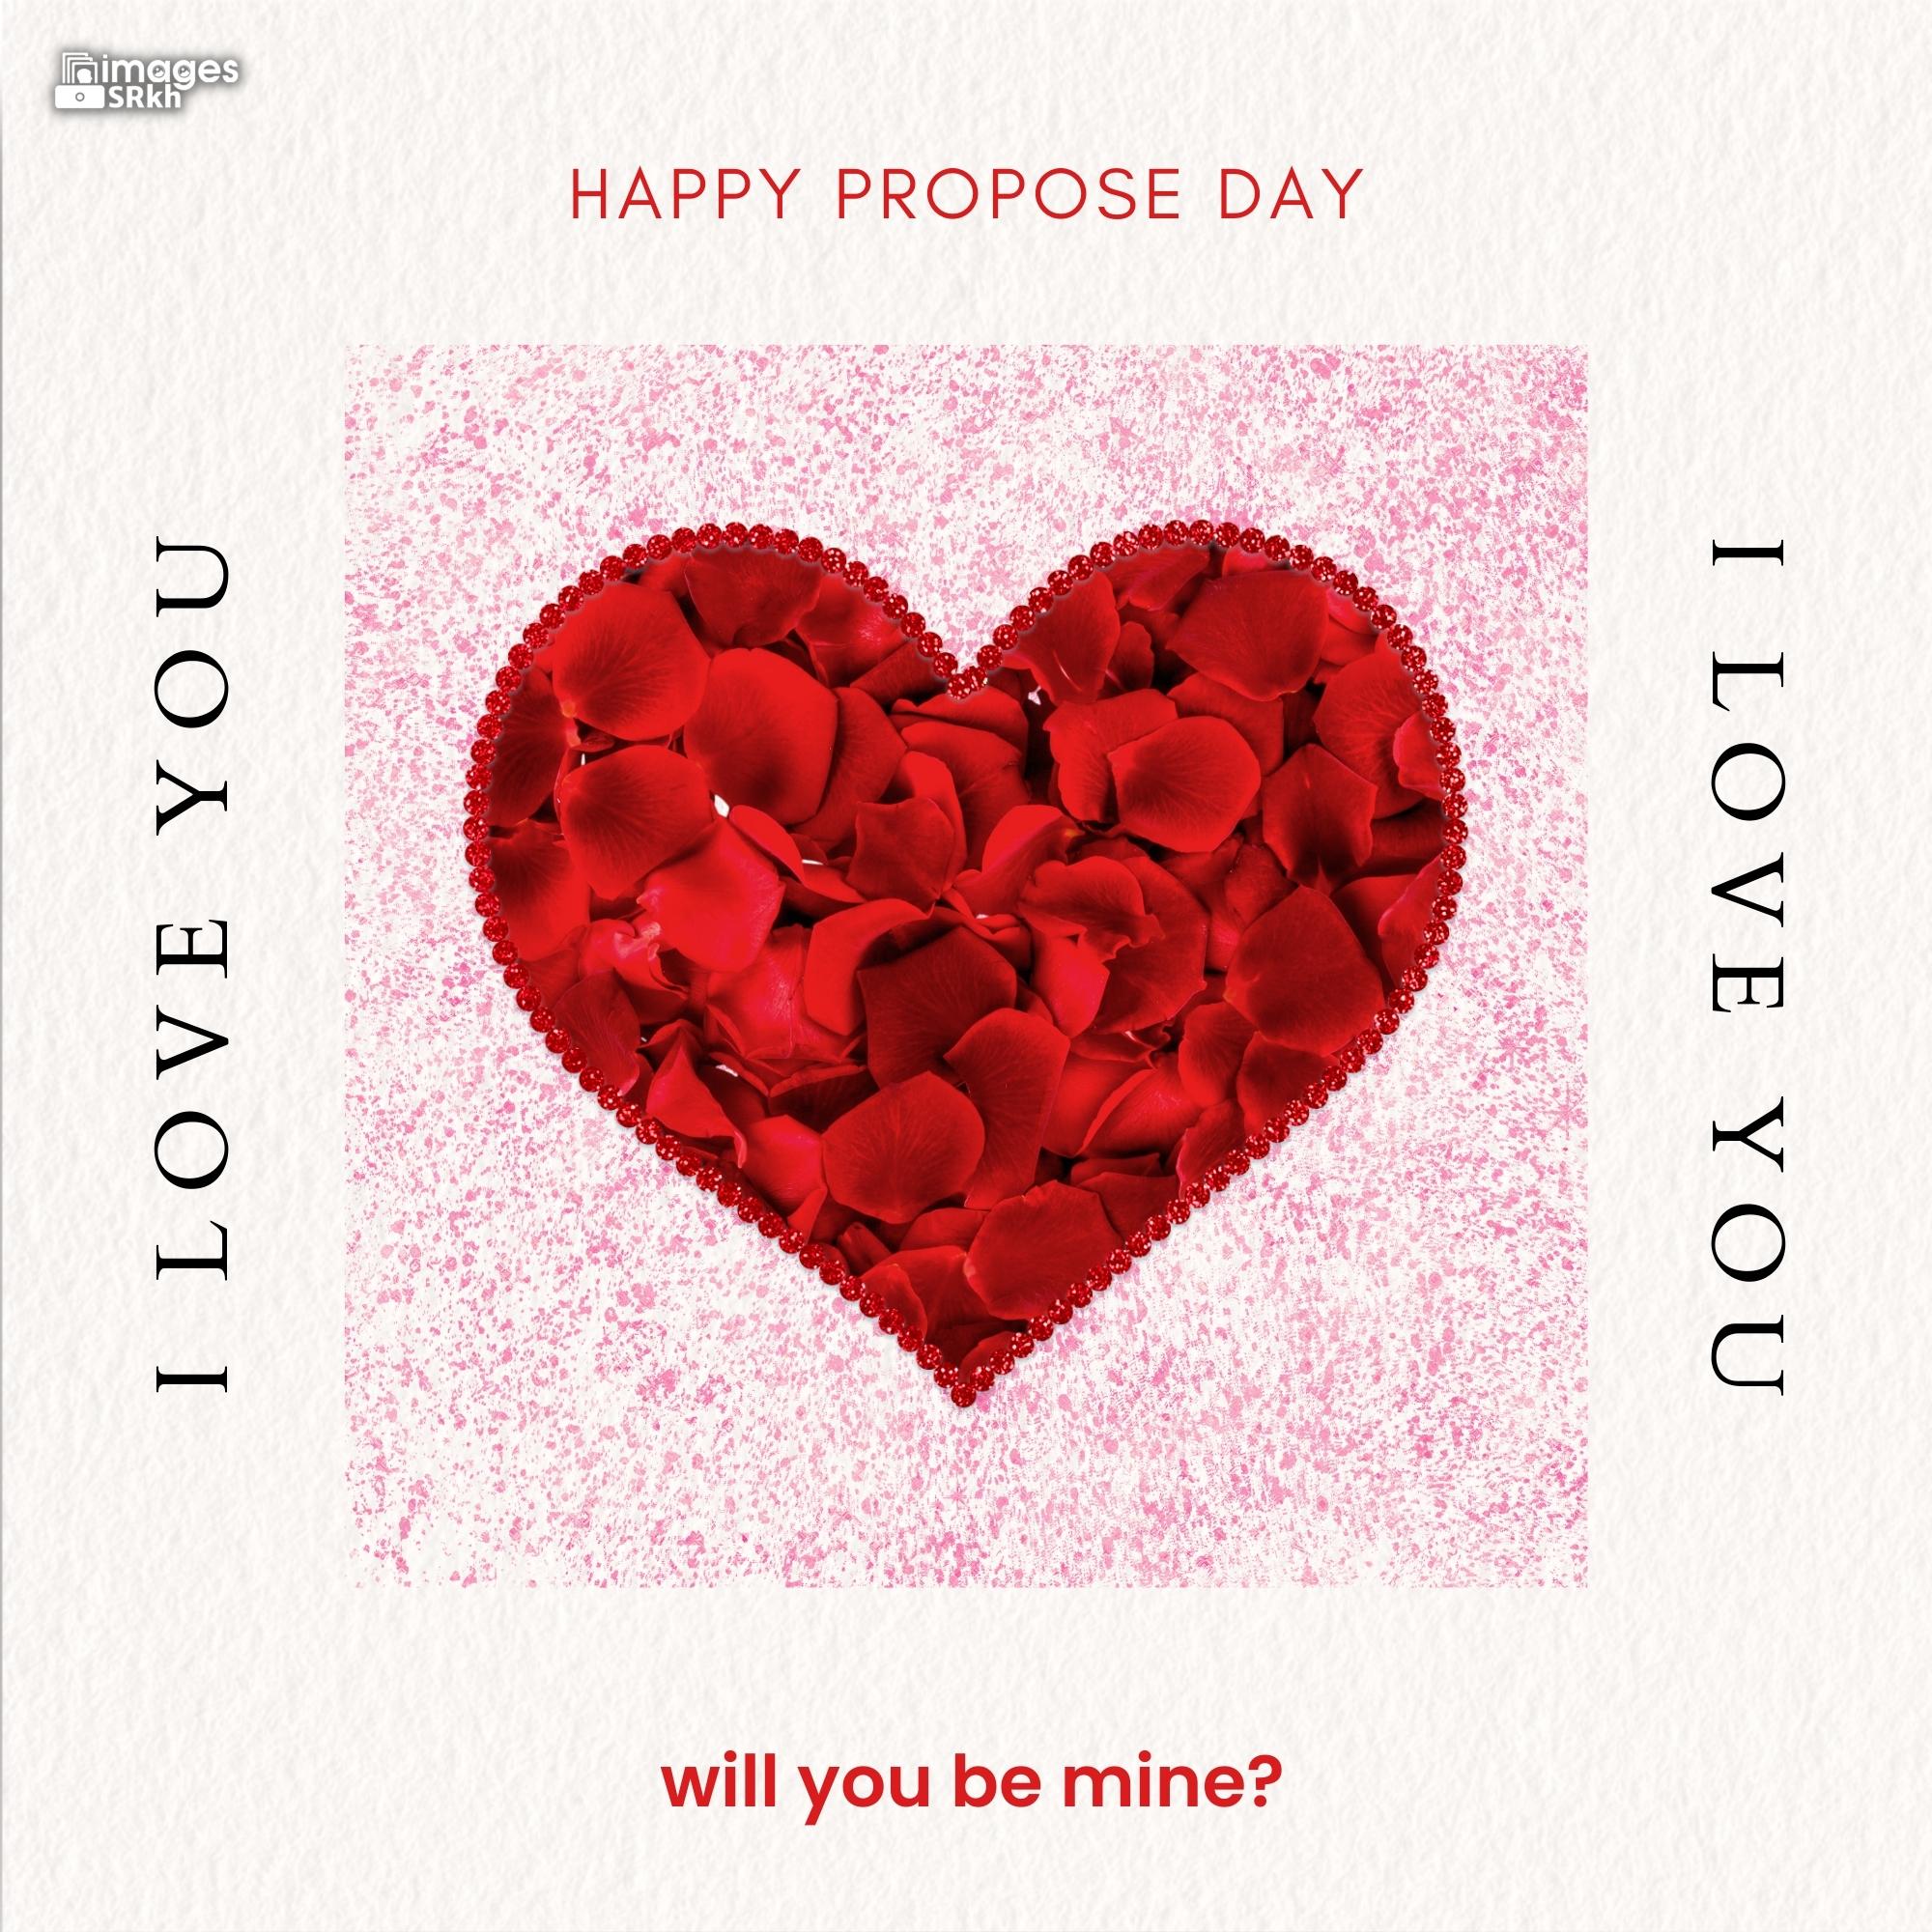 Happy Propose Day Images | 430 | I love you will you be mine